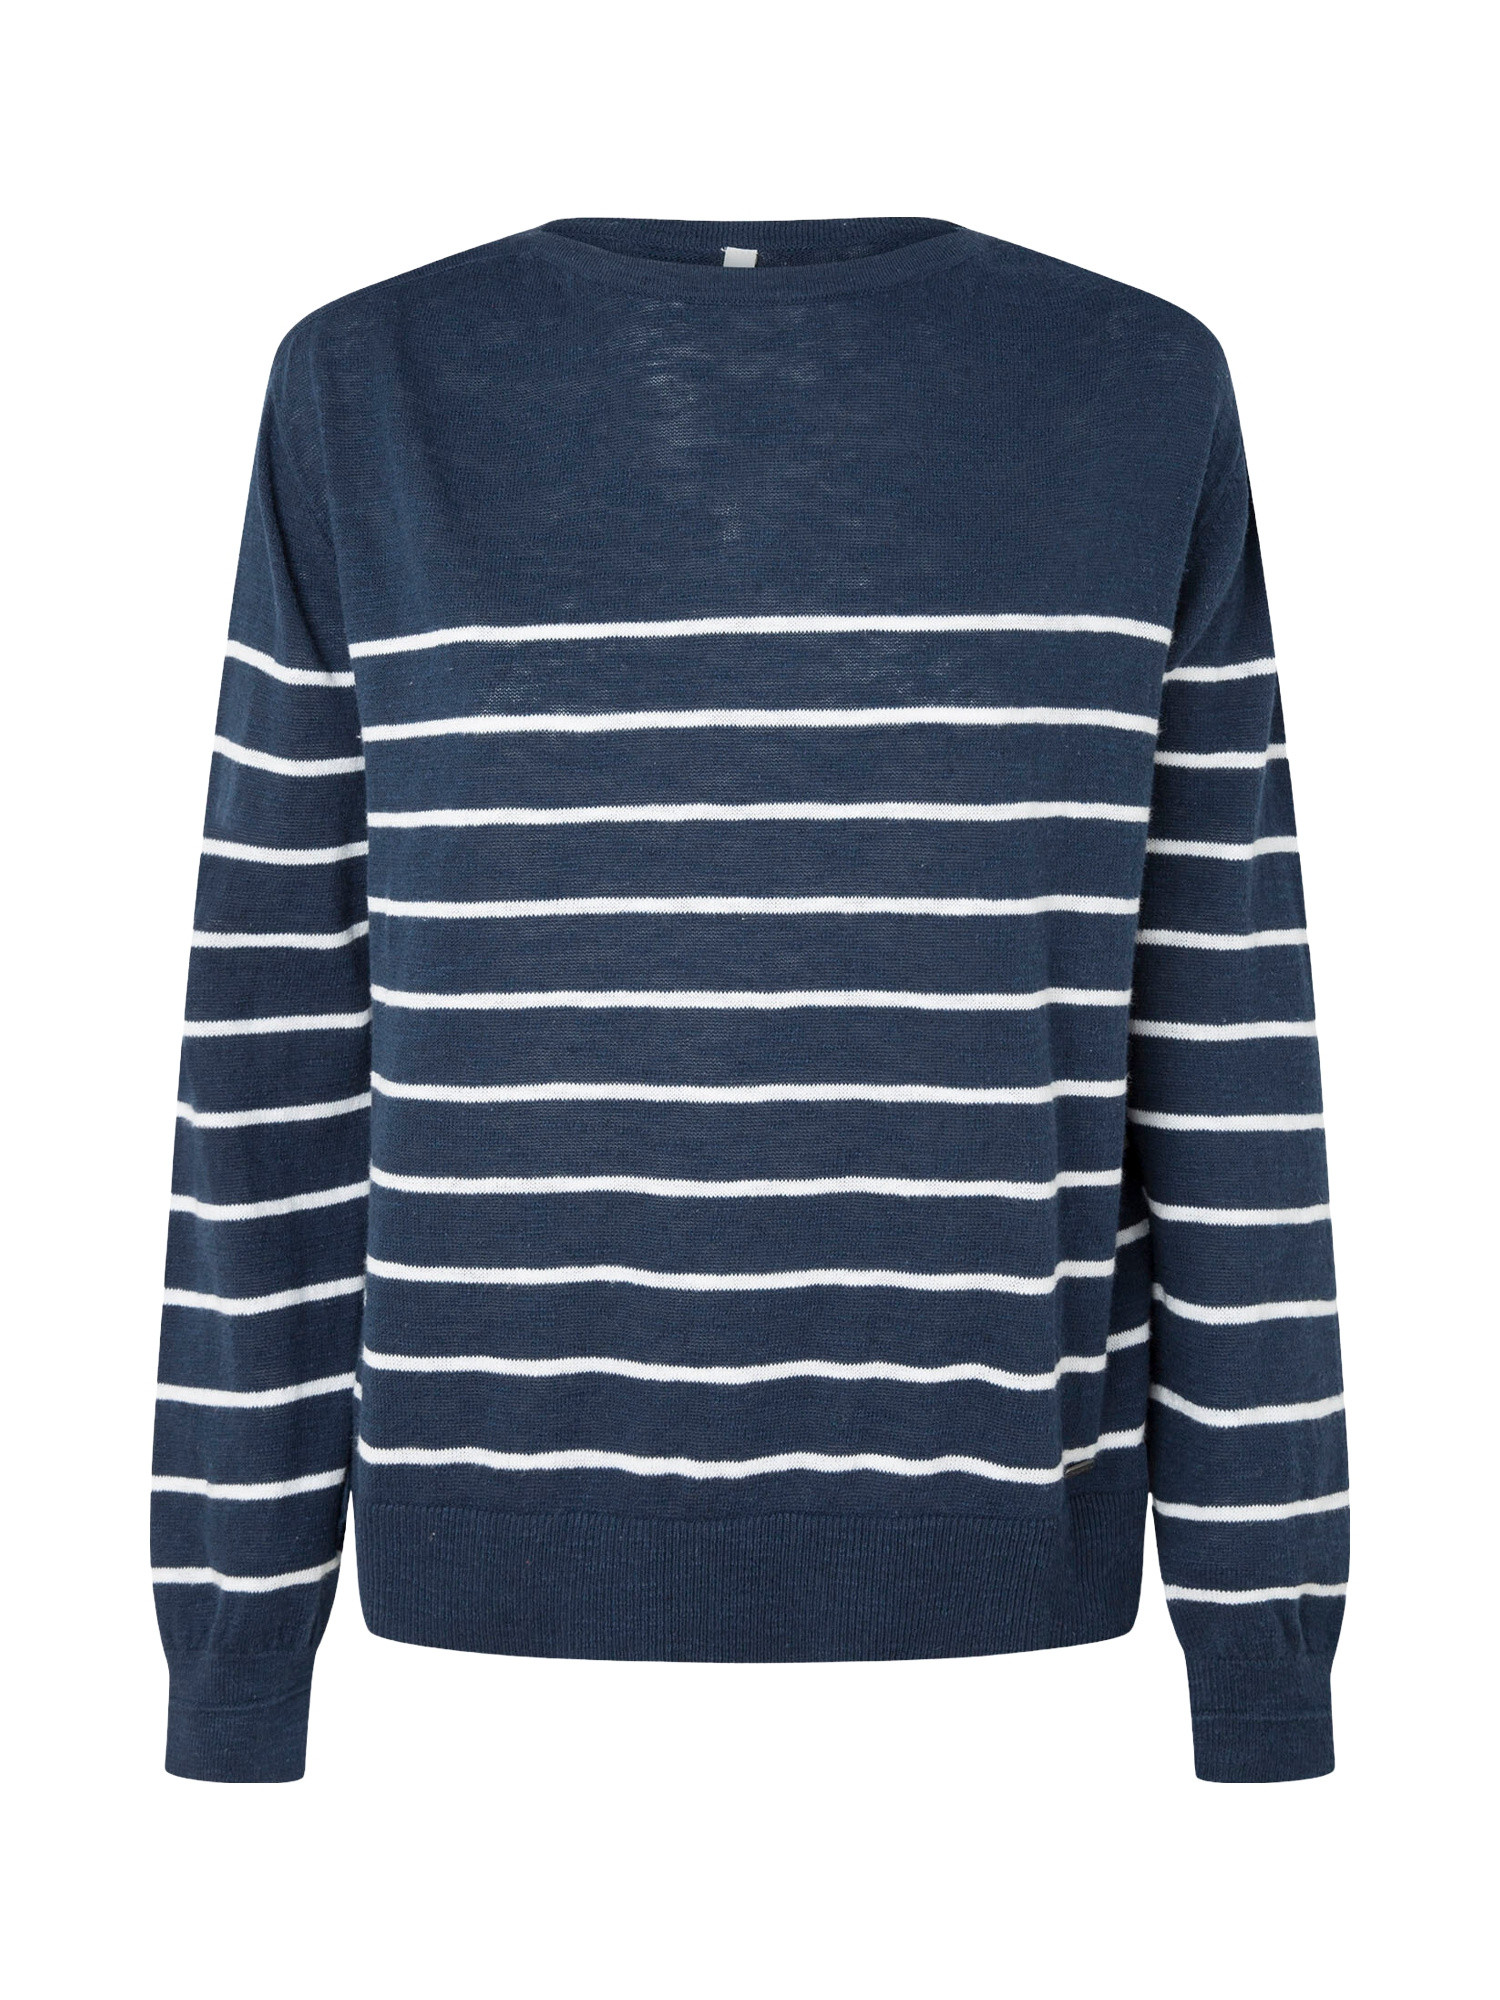 Pepe Jeans - Striped pullover, Dark Blue, large image number 0